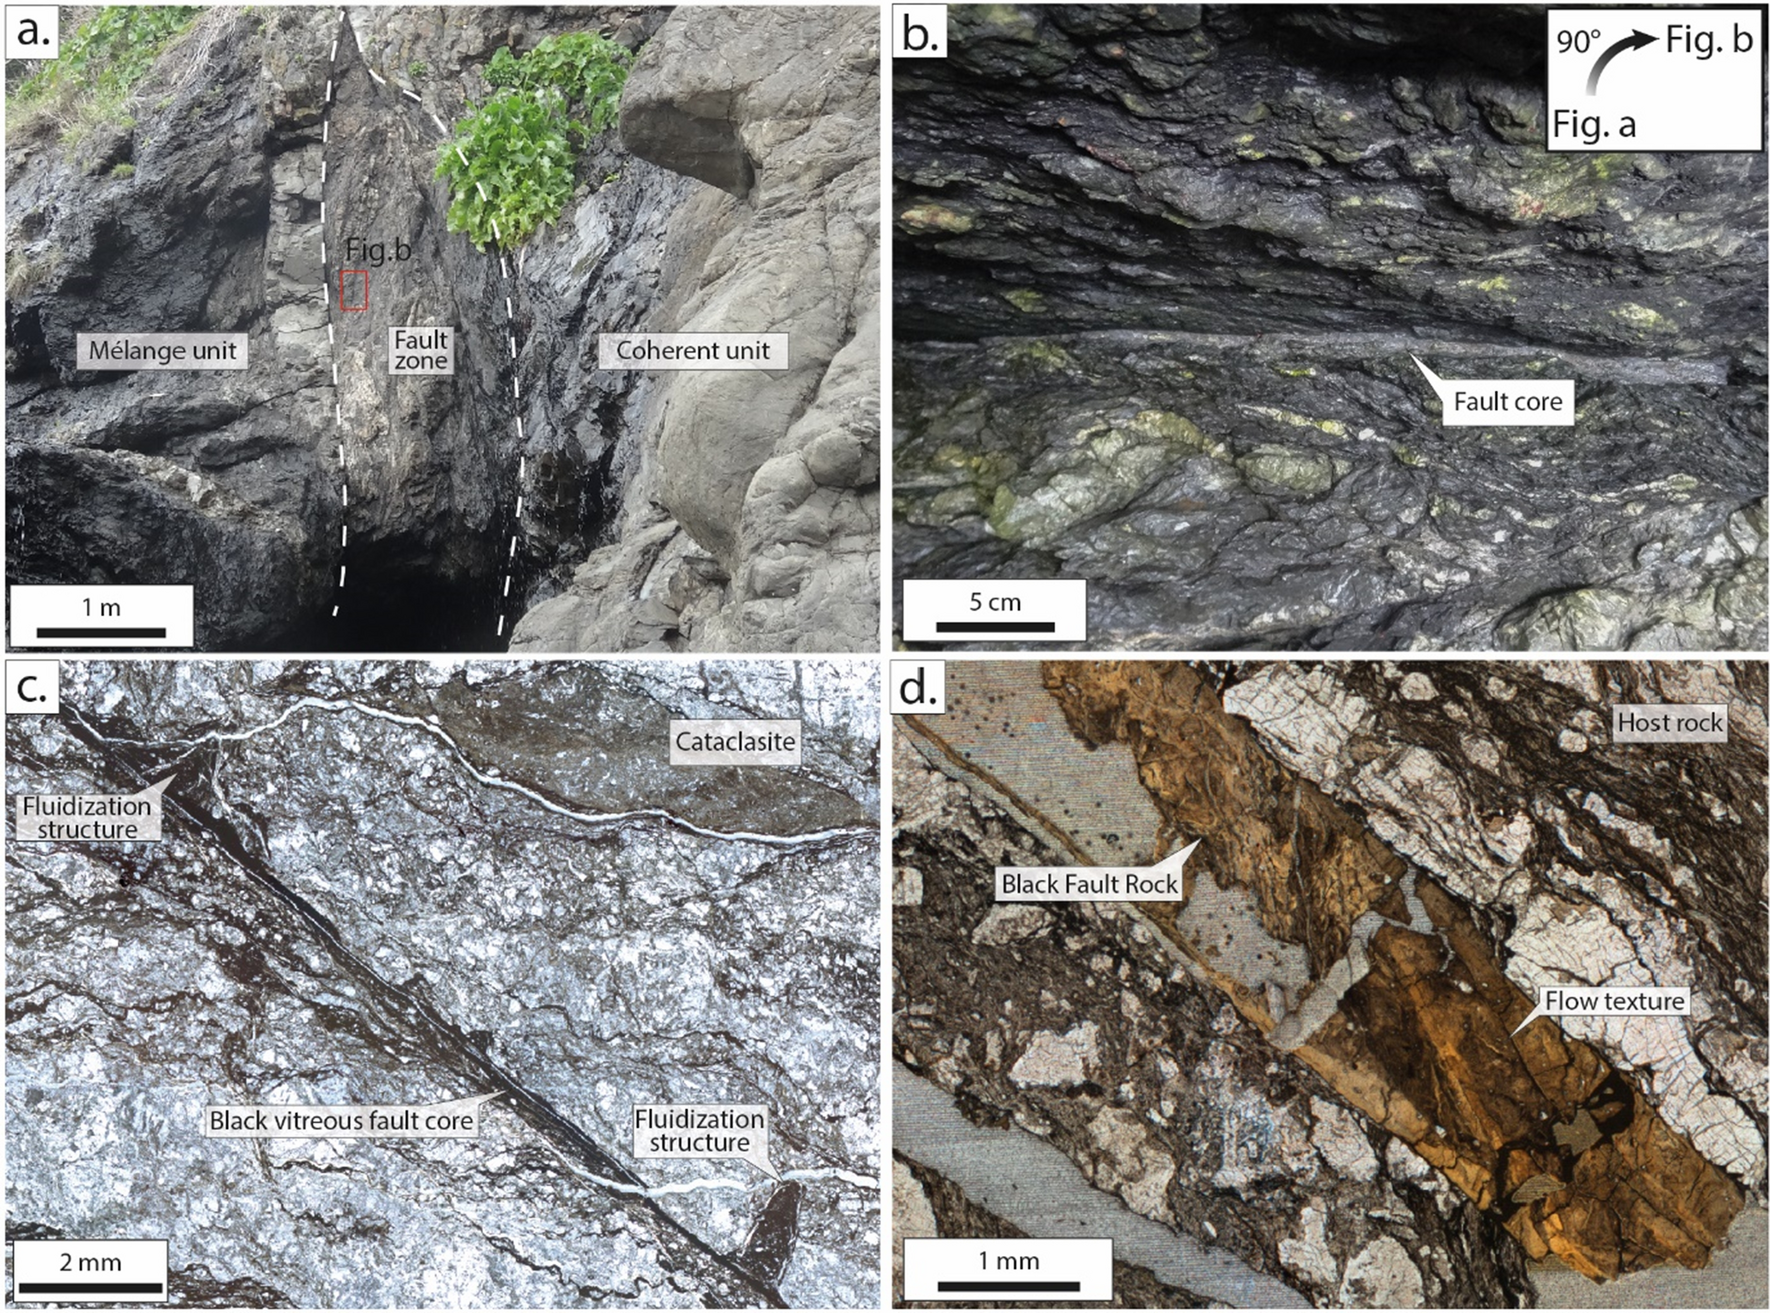 The impact of melt versus mechanical wear on the formation of  pseudotachylyte veins in accretionary complexes | Scientific Reports